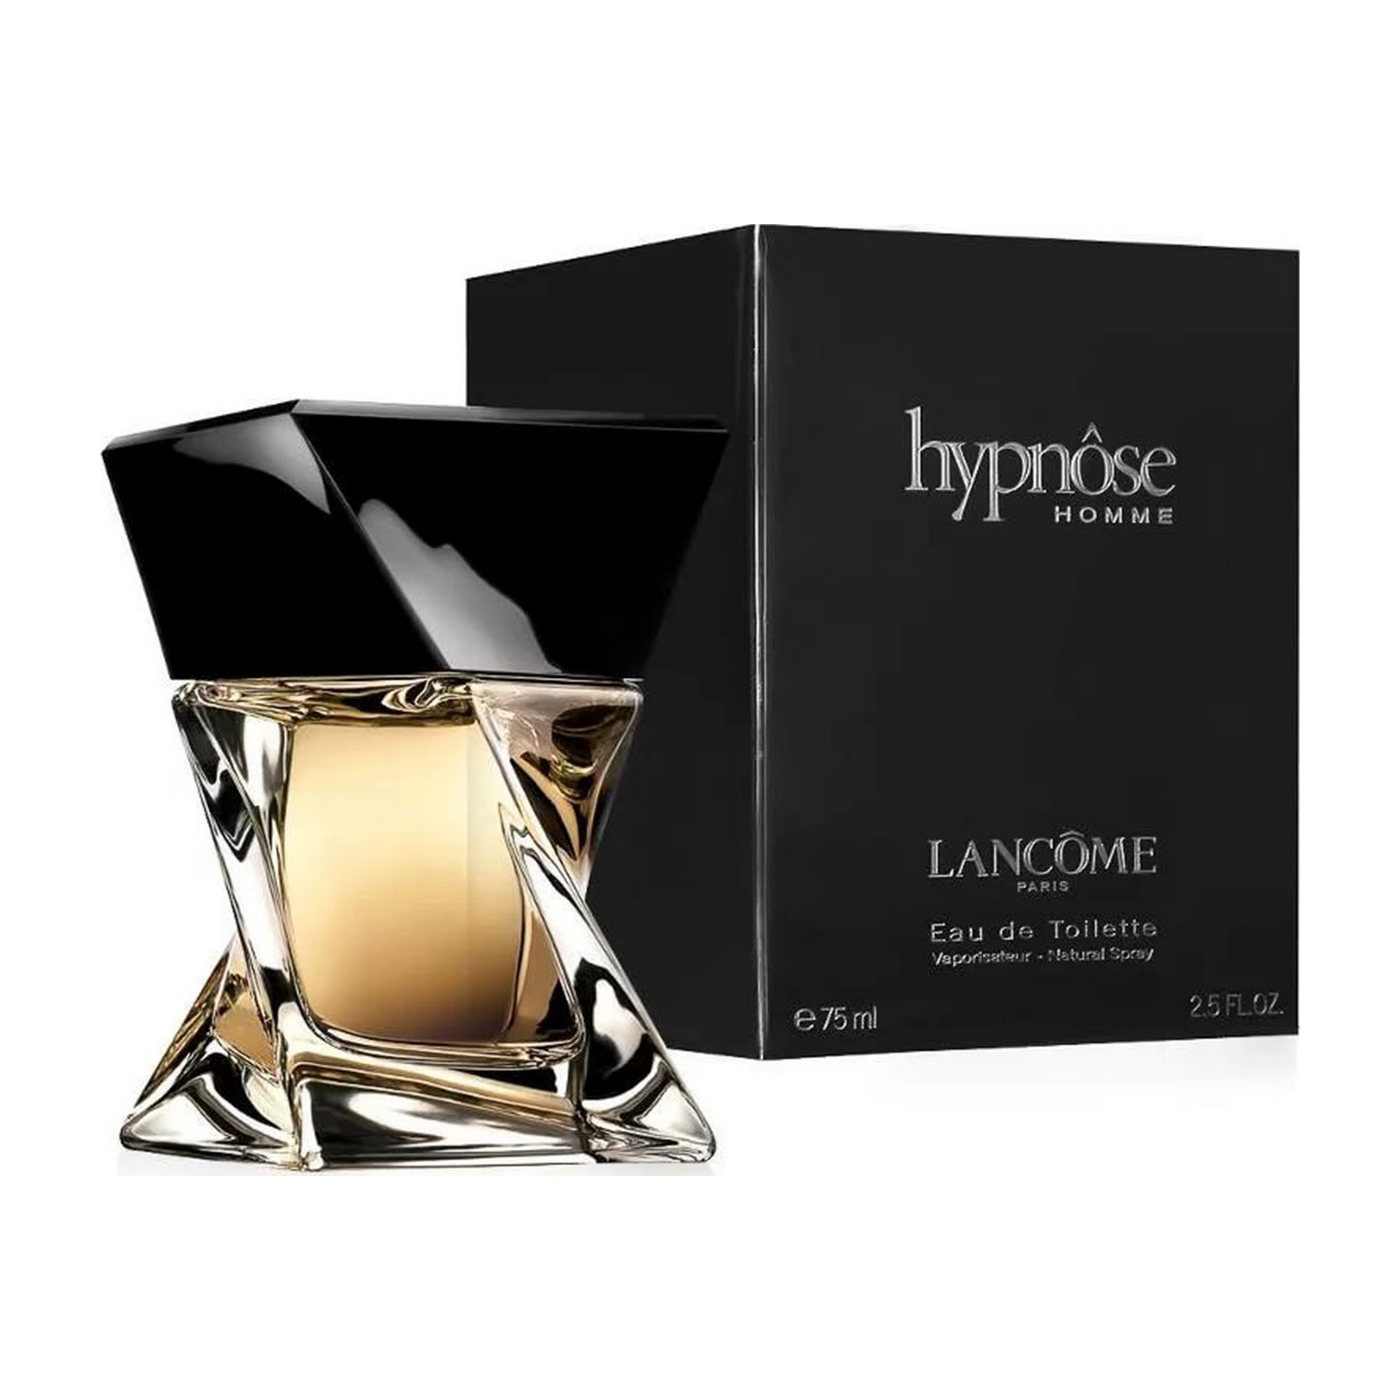 Lancome homme. Lancome Hypnose homme EDT 50ml. Lancome туалетная вода Hypnose homme, 50 мл. Lancome Hypnose 75 мл. Ланком Hypnose homme женское.